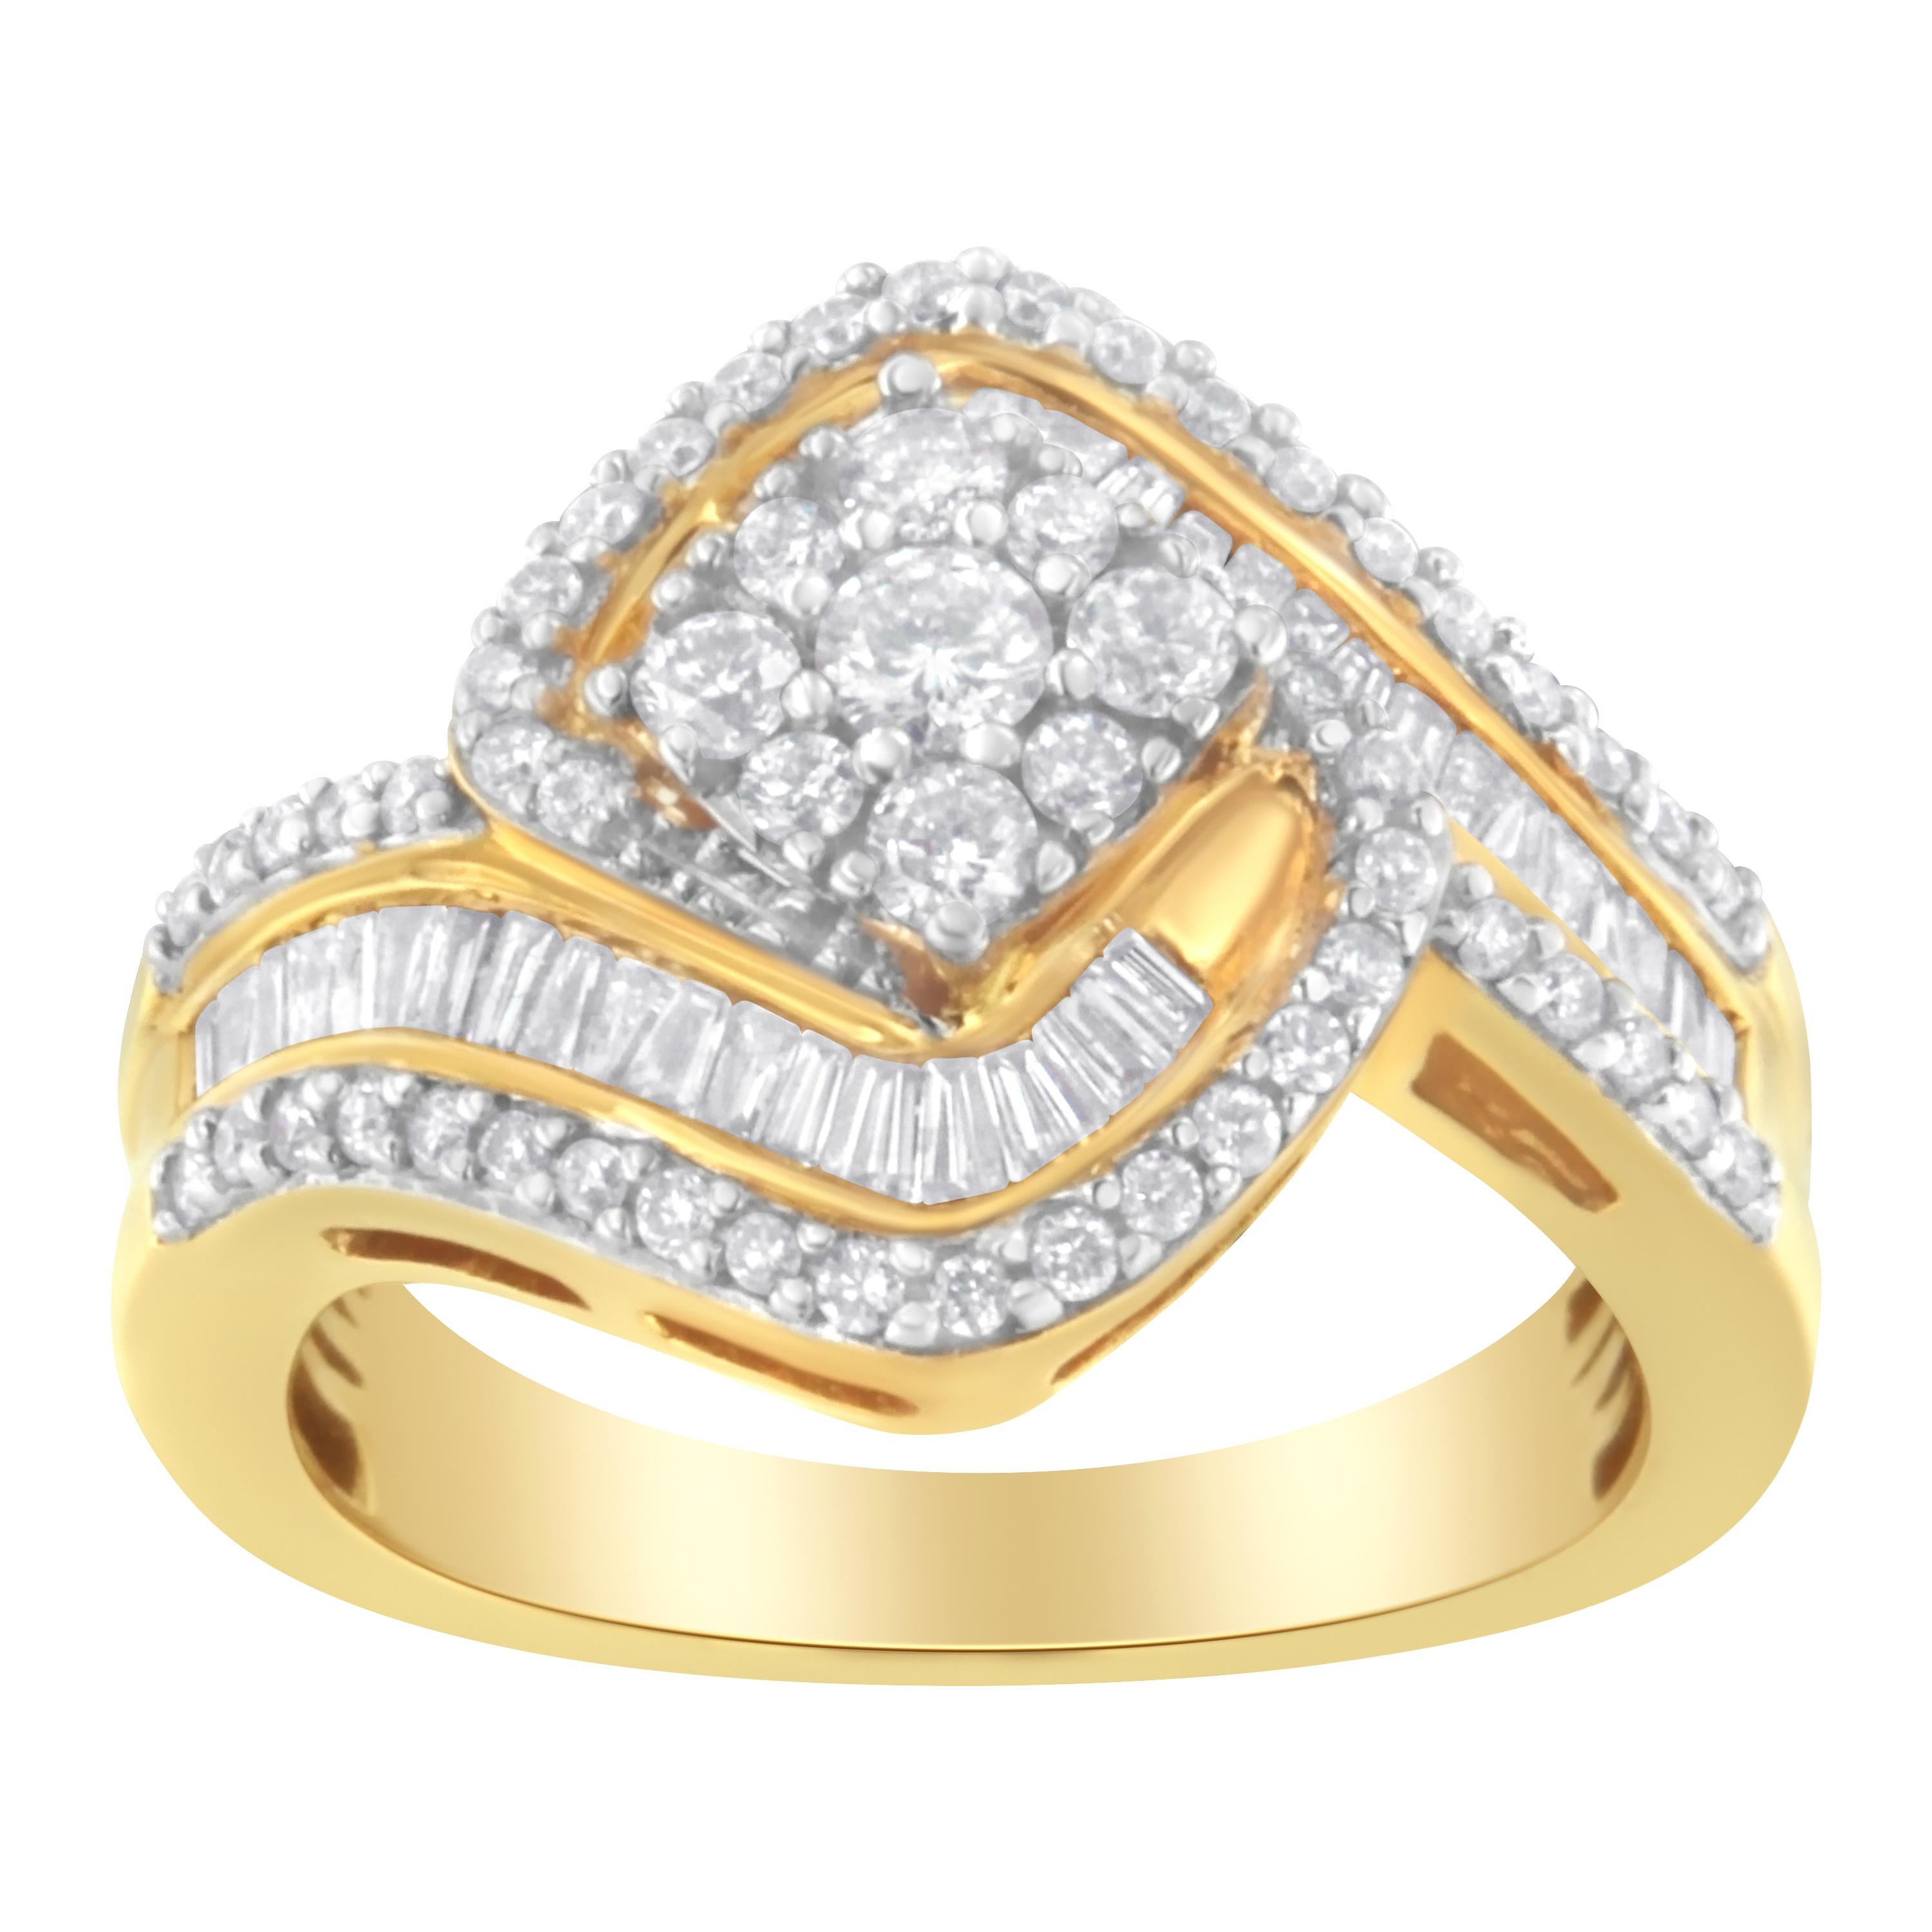 For Sale:  14K Yellow Gold 1.00 Carat Diamond Bypass Cluster Ring 2